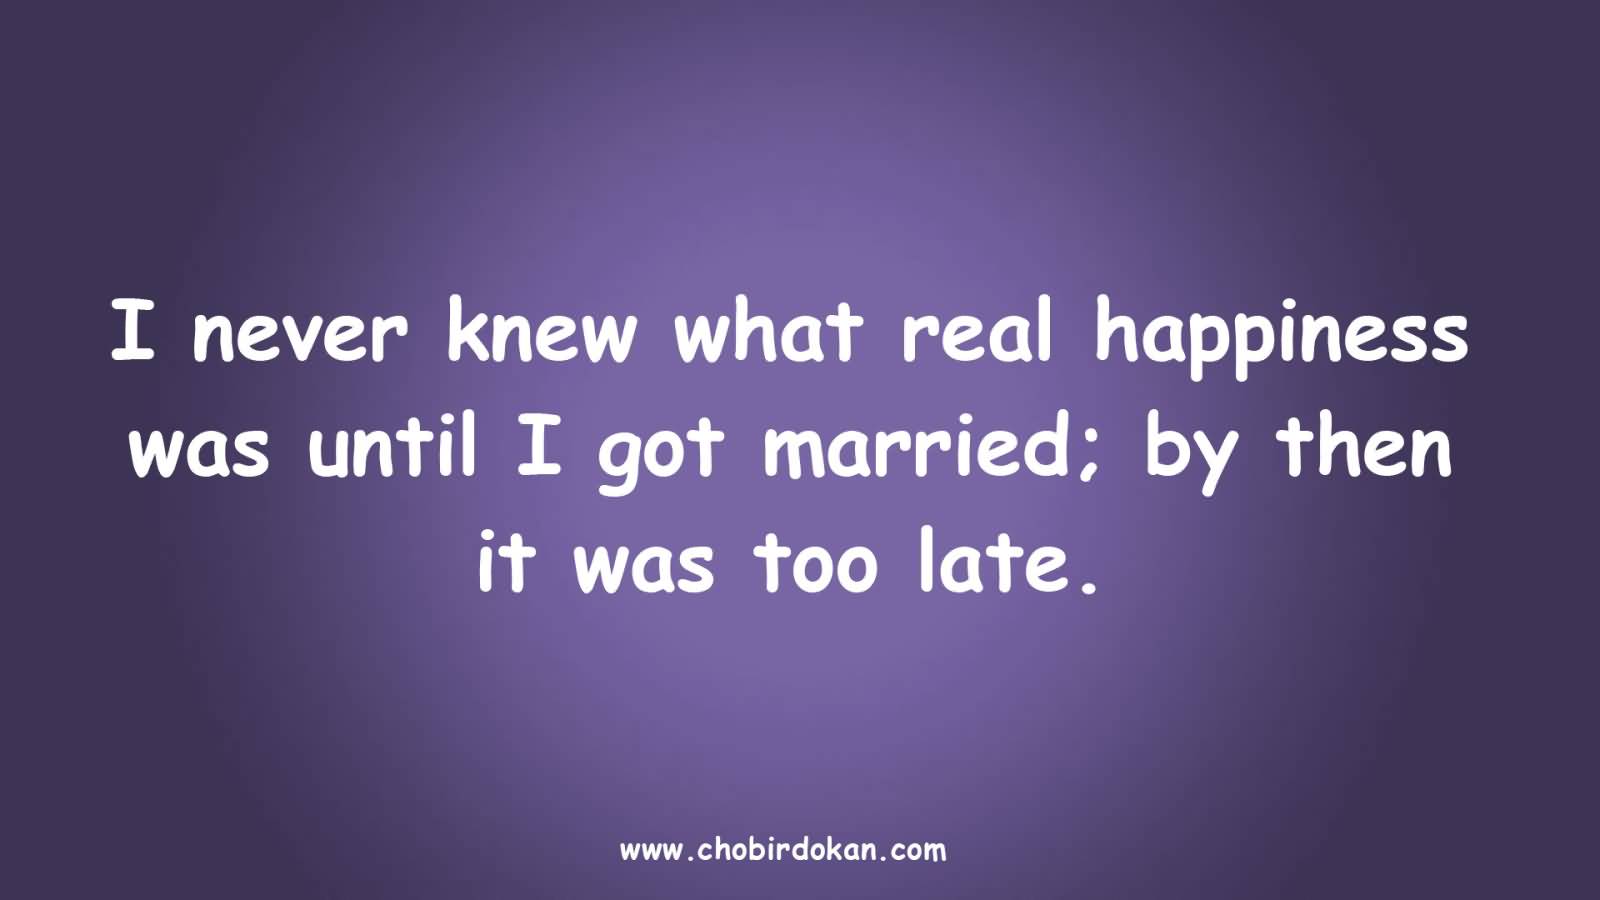 I never knew what real happiness was until I got married; and then it was too late.